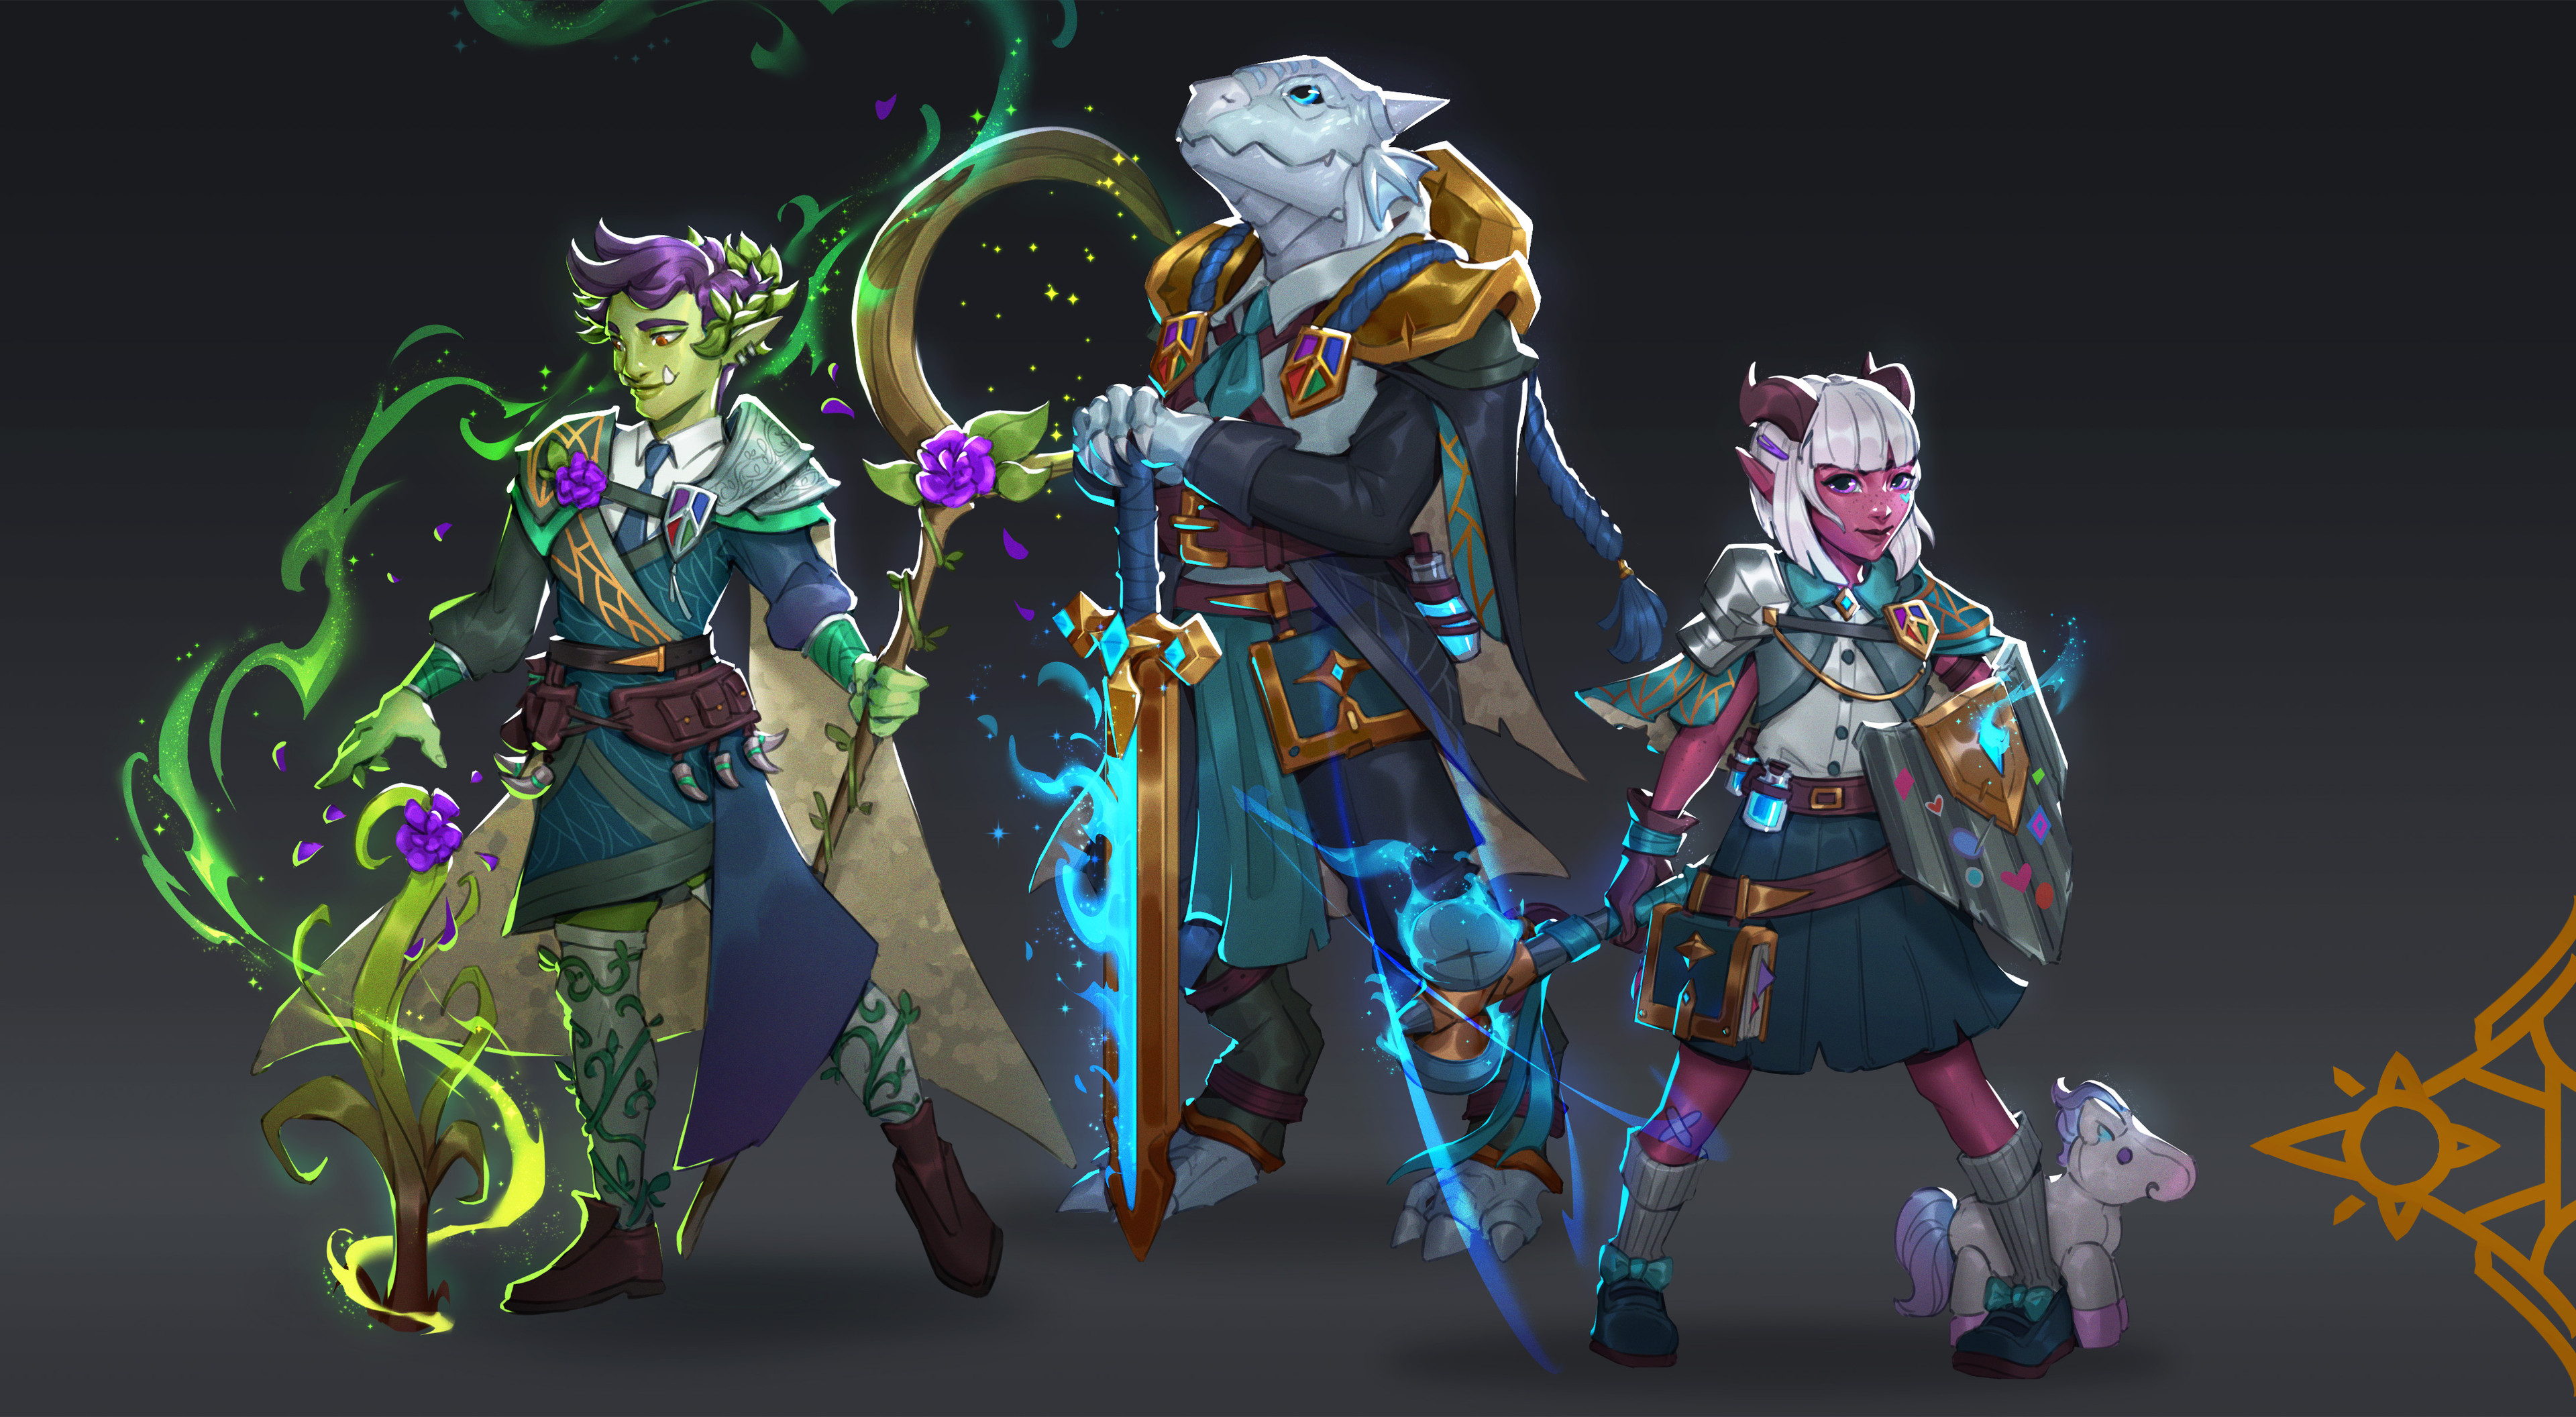 House DIVINE: Druid, Paladin, Cleric (Left to Right)